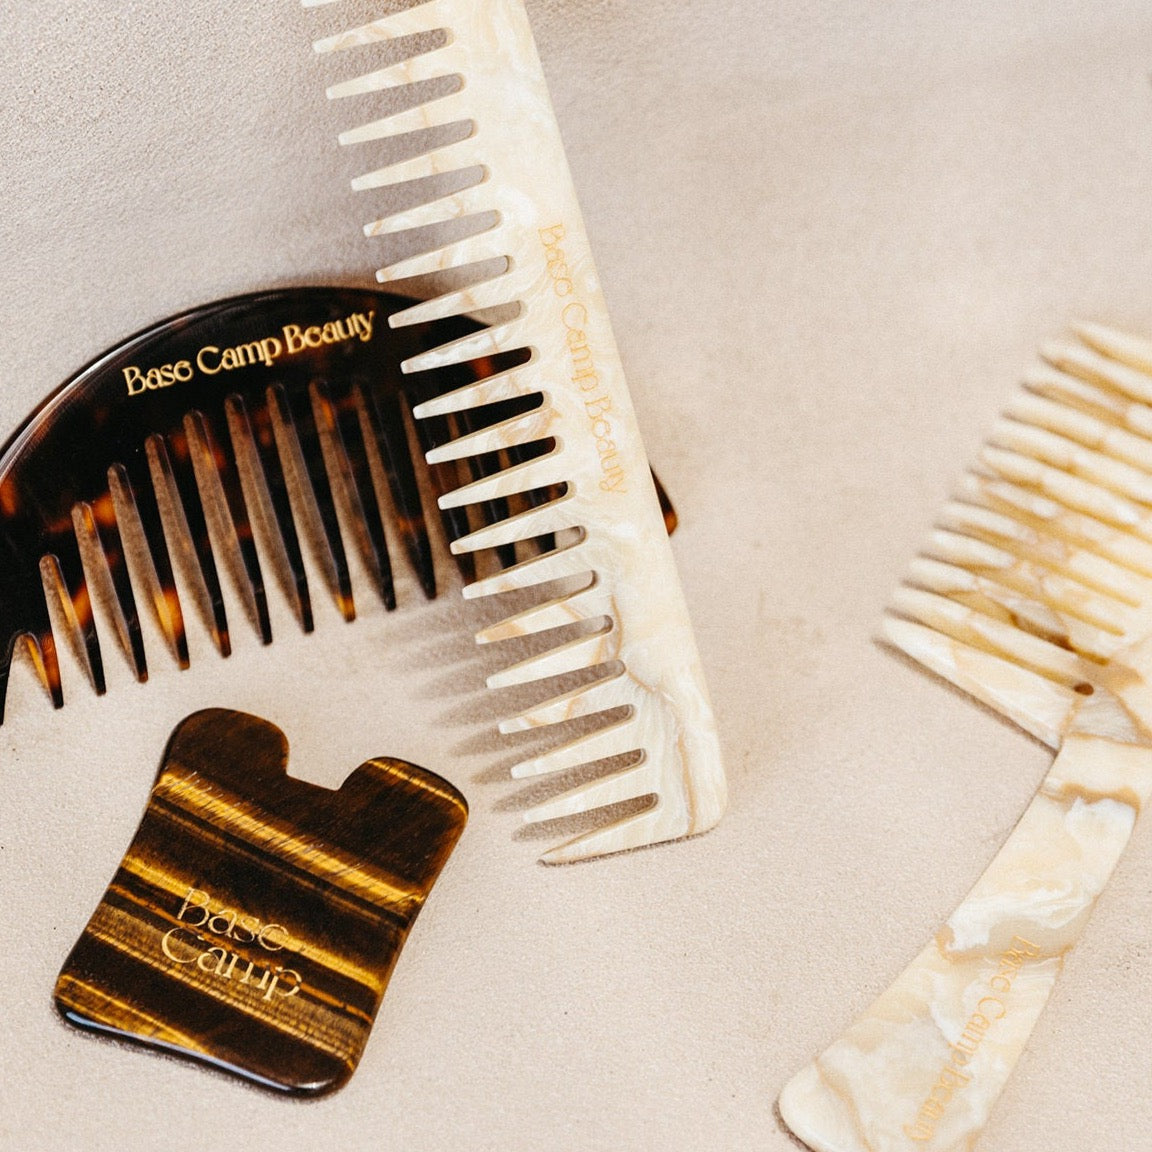 base camp combs by Base Camp Beauty